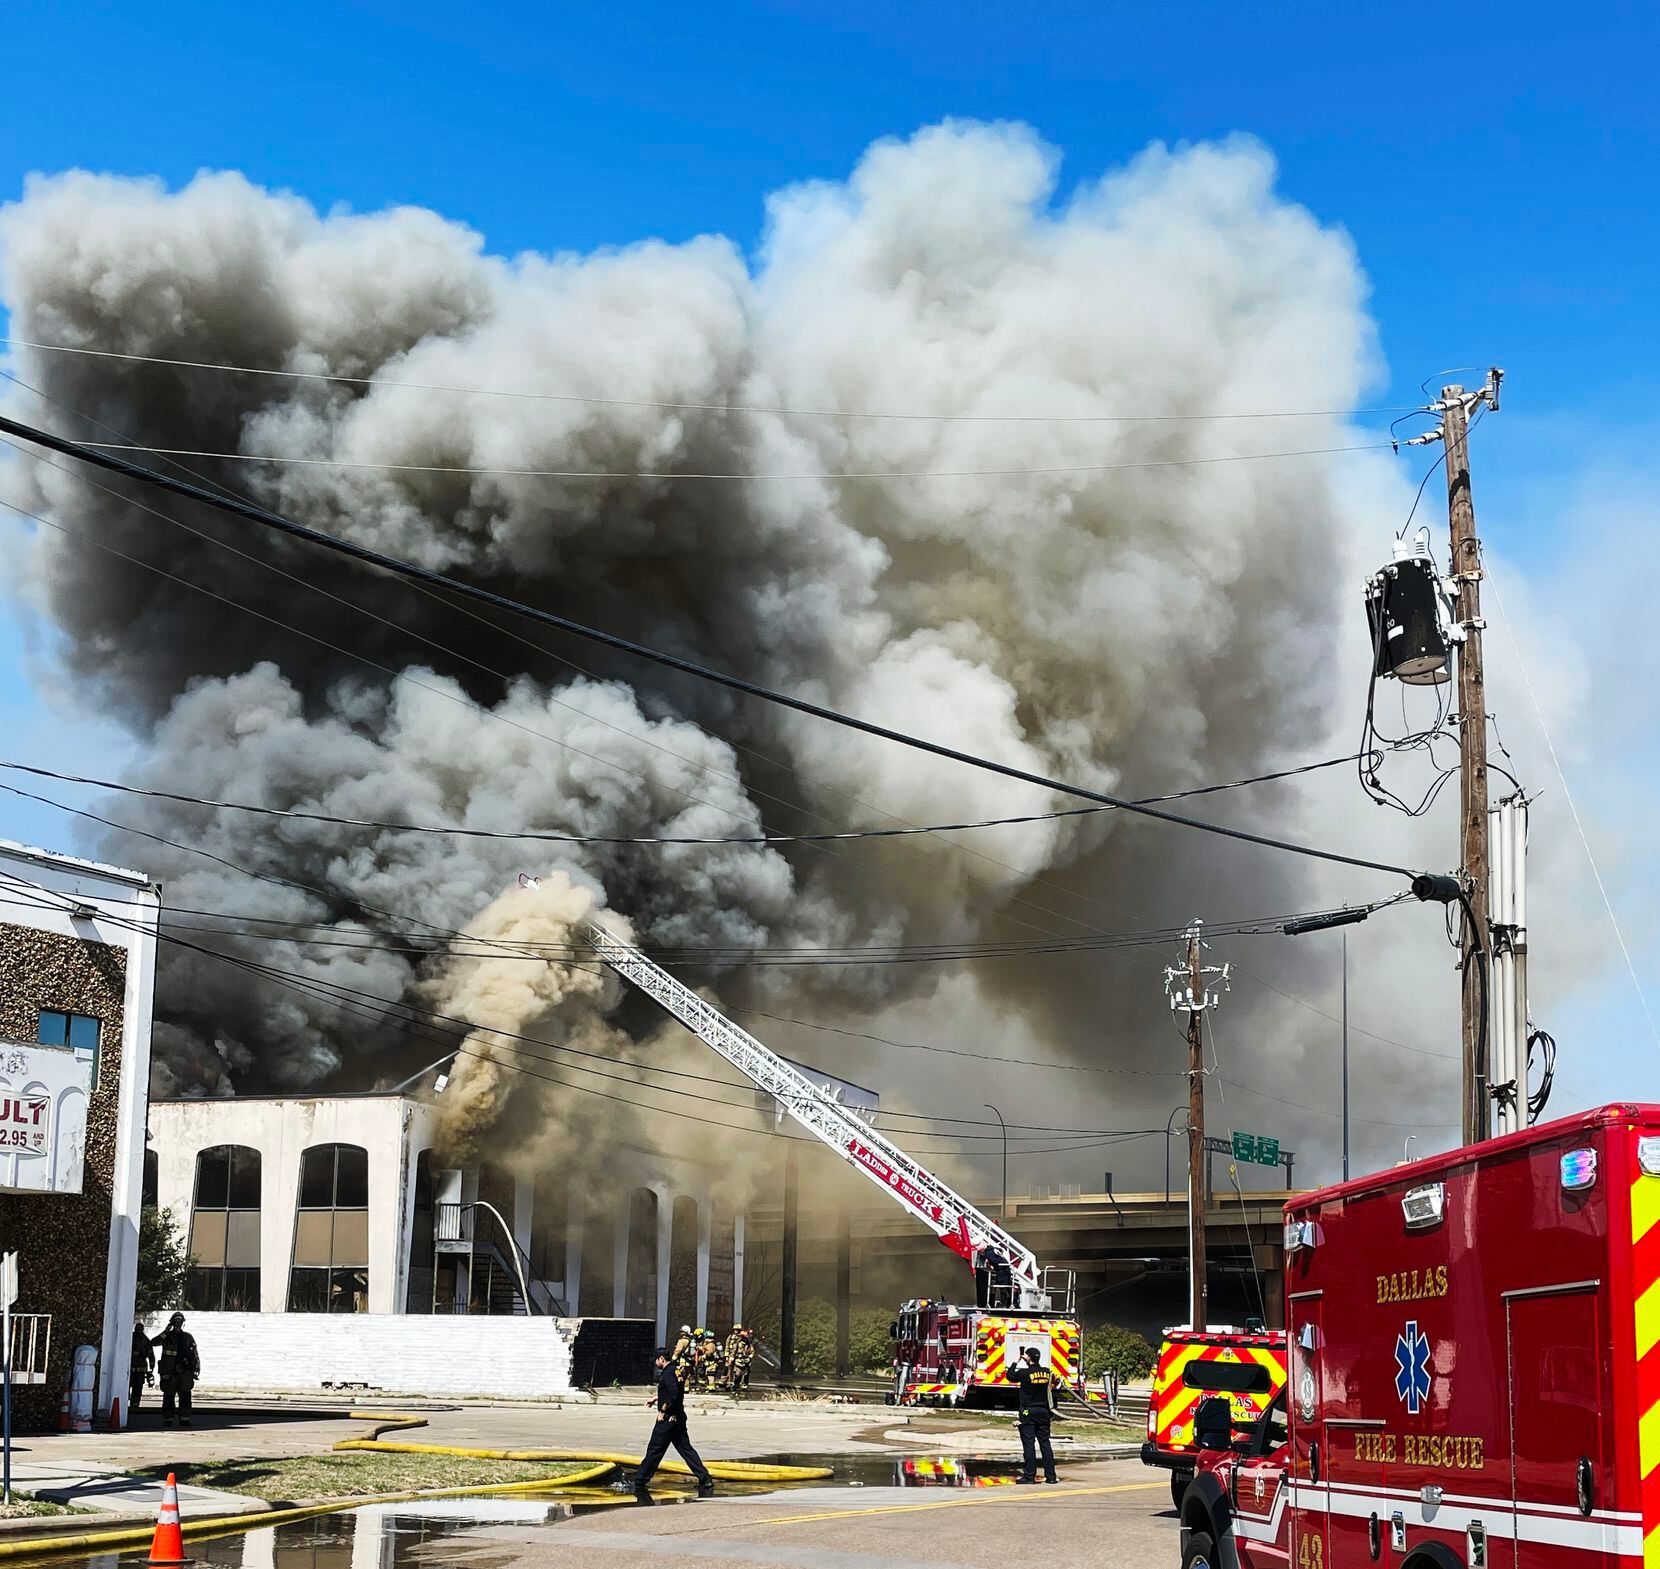 About 50 to 60 Dallas firefighters battled a blaze at a vacant two-story building in...